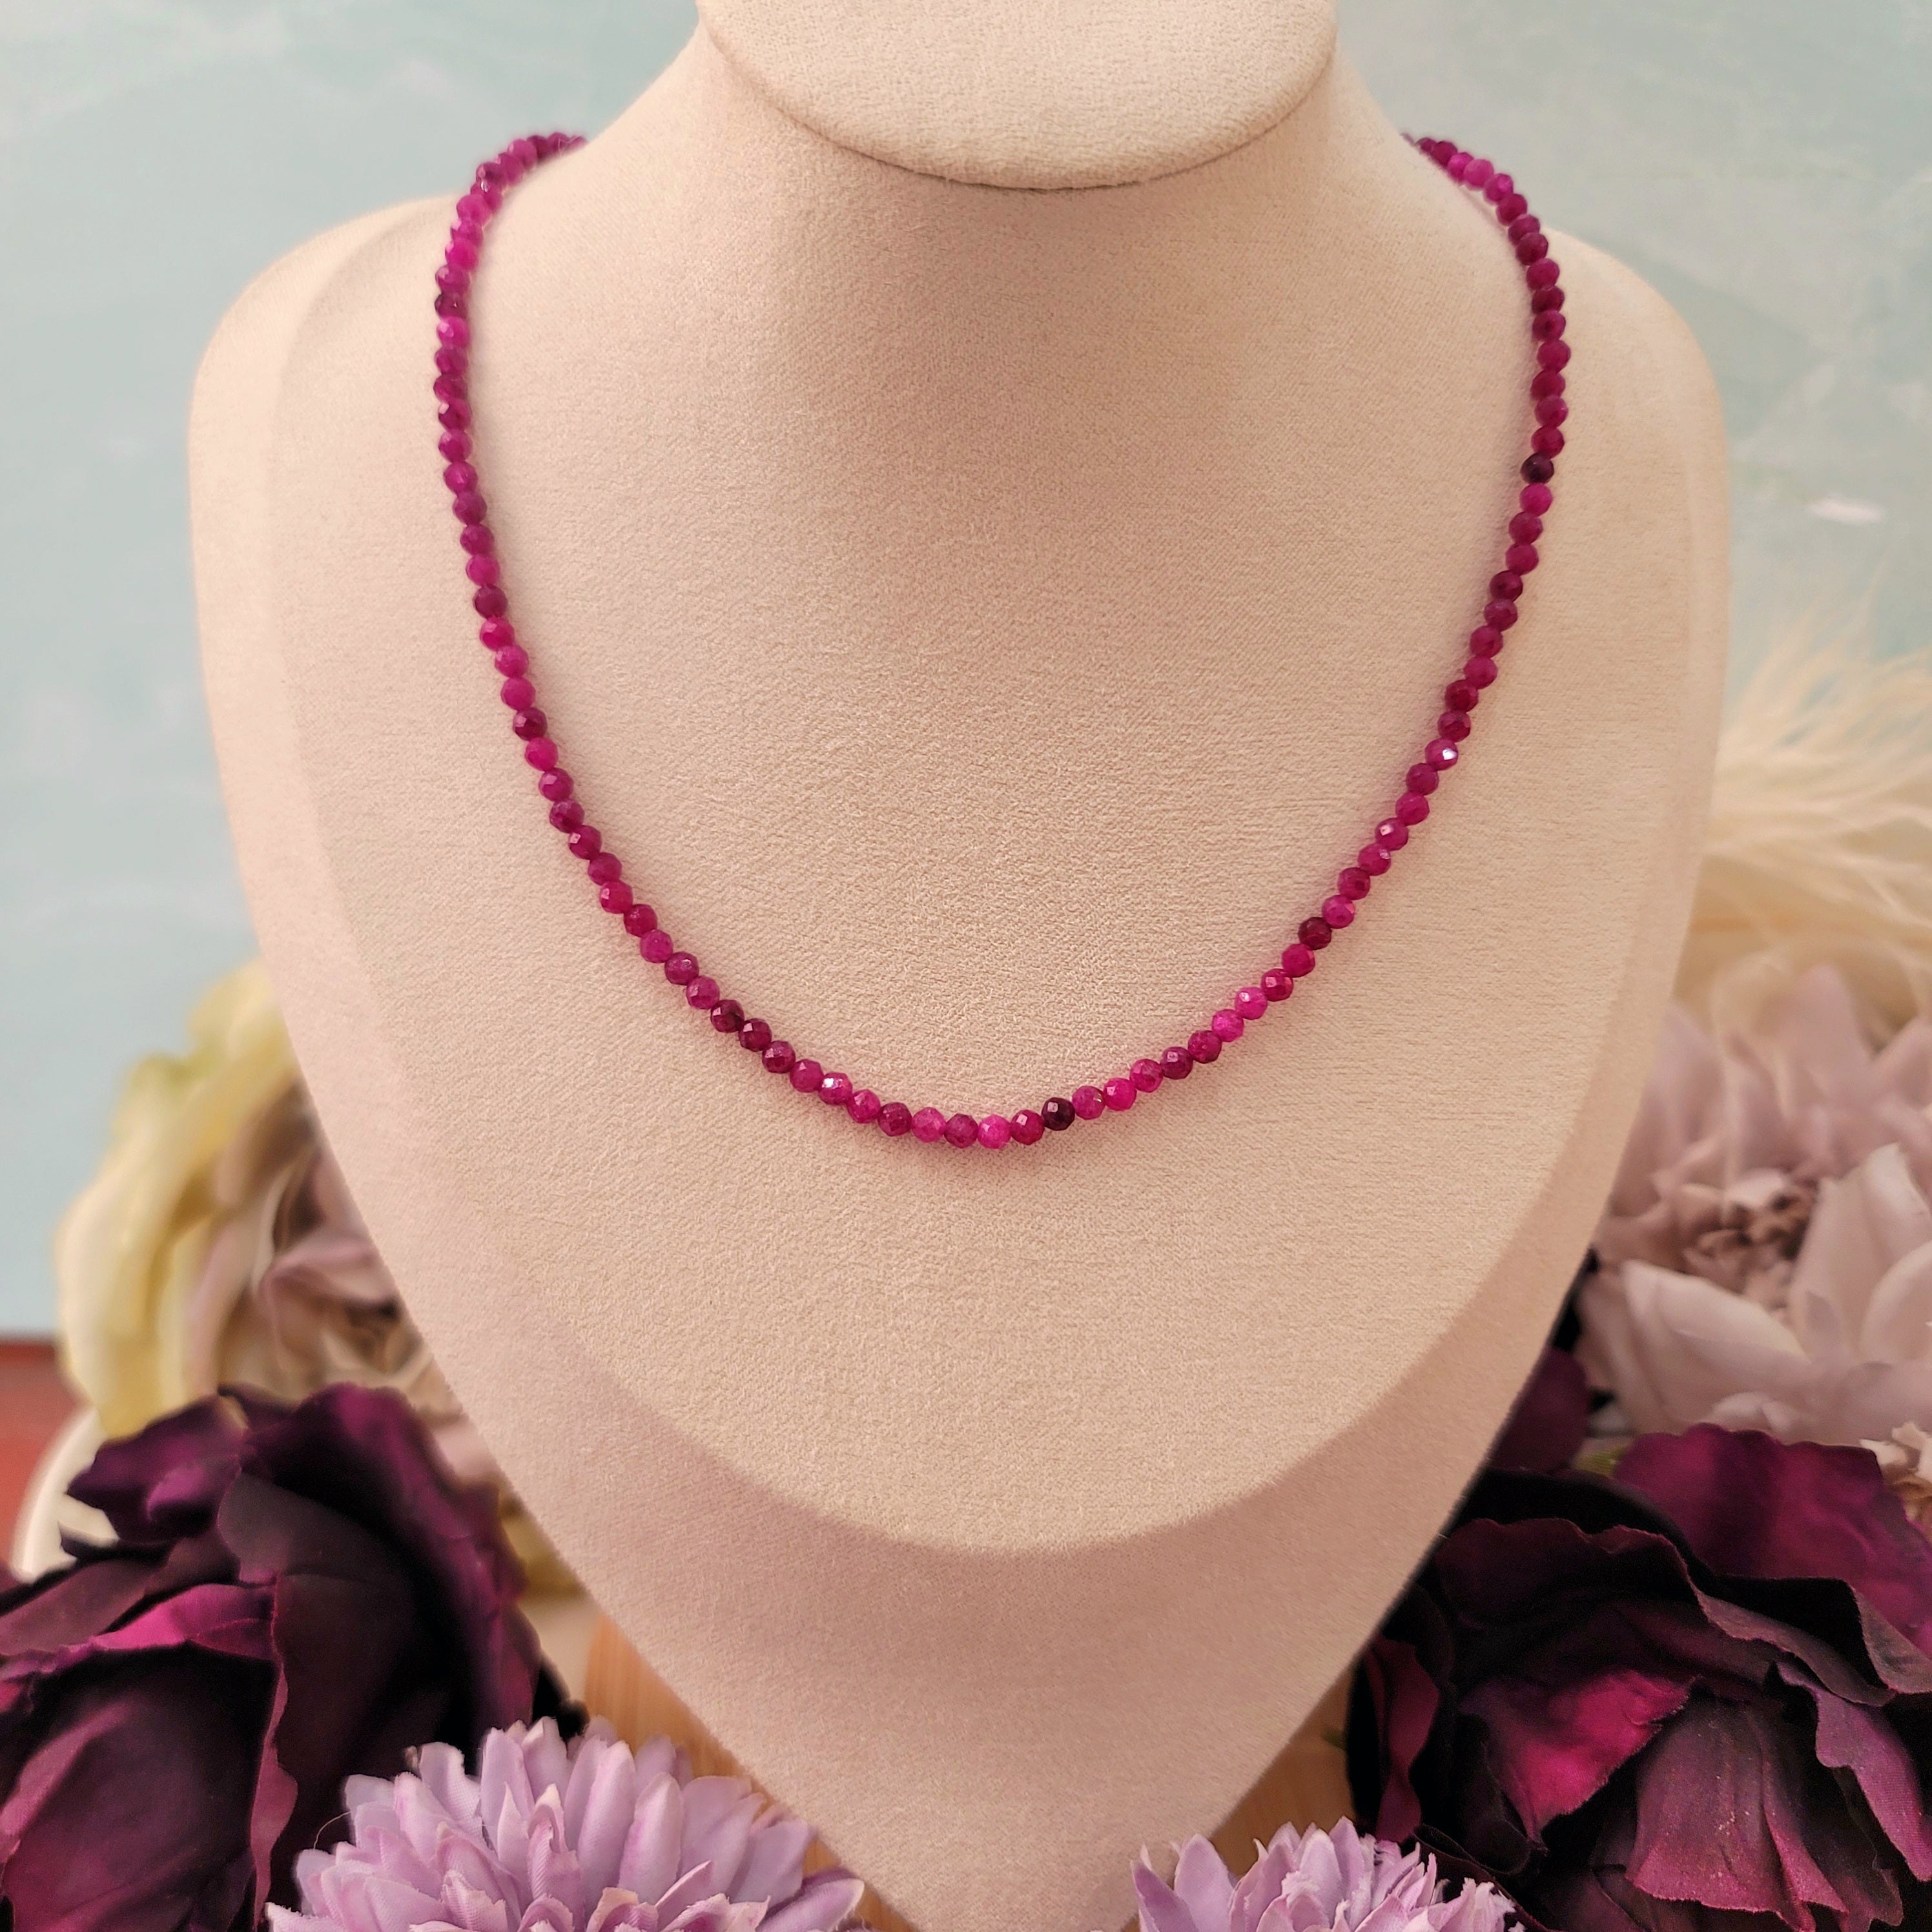 Ruby Micro Faceted Choker/Layering Necklace for Supporting Flow of Energy & Enlightenment for Root Chakra